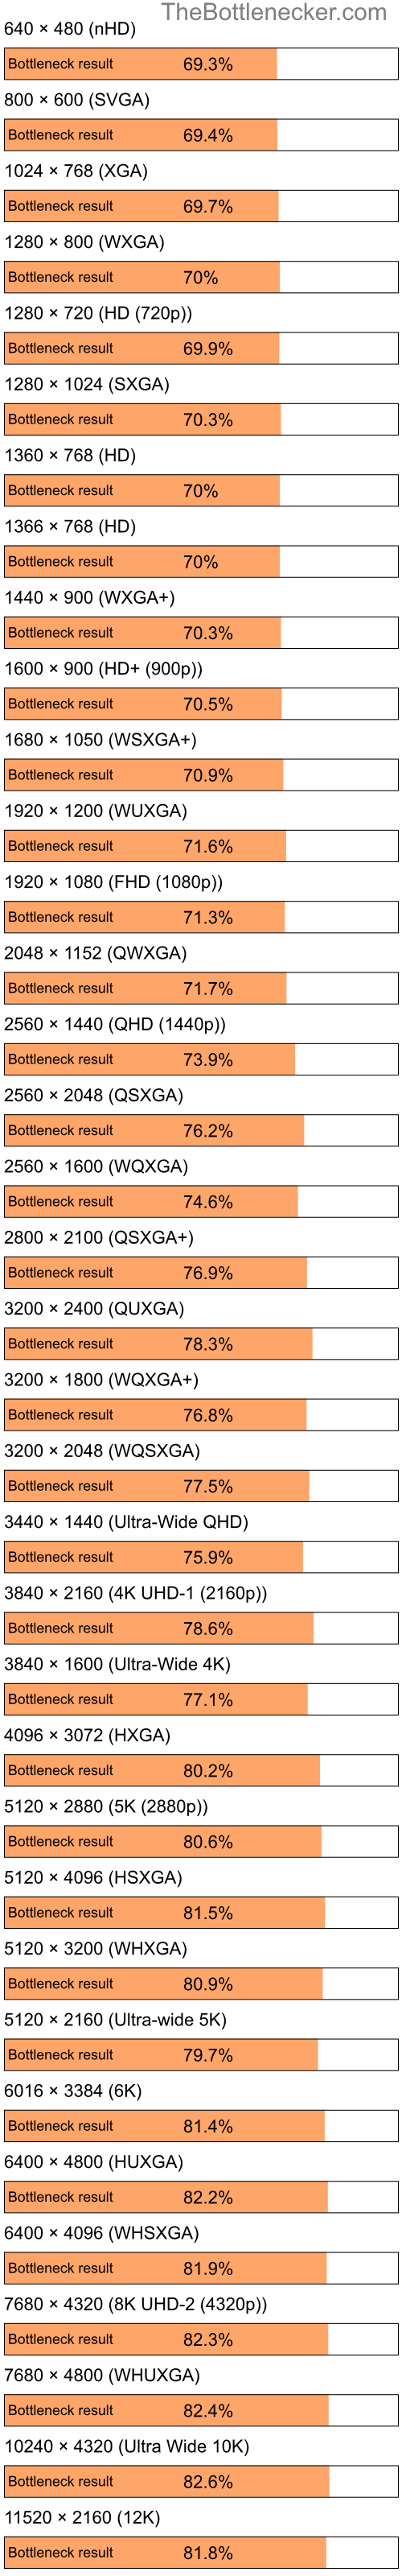 Bottleneck results by resolution for Intel Pentium 4 and AMD Radeon HD 7290 in Graphic Card Intense Tasks